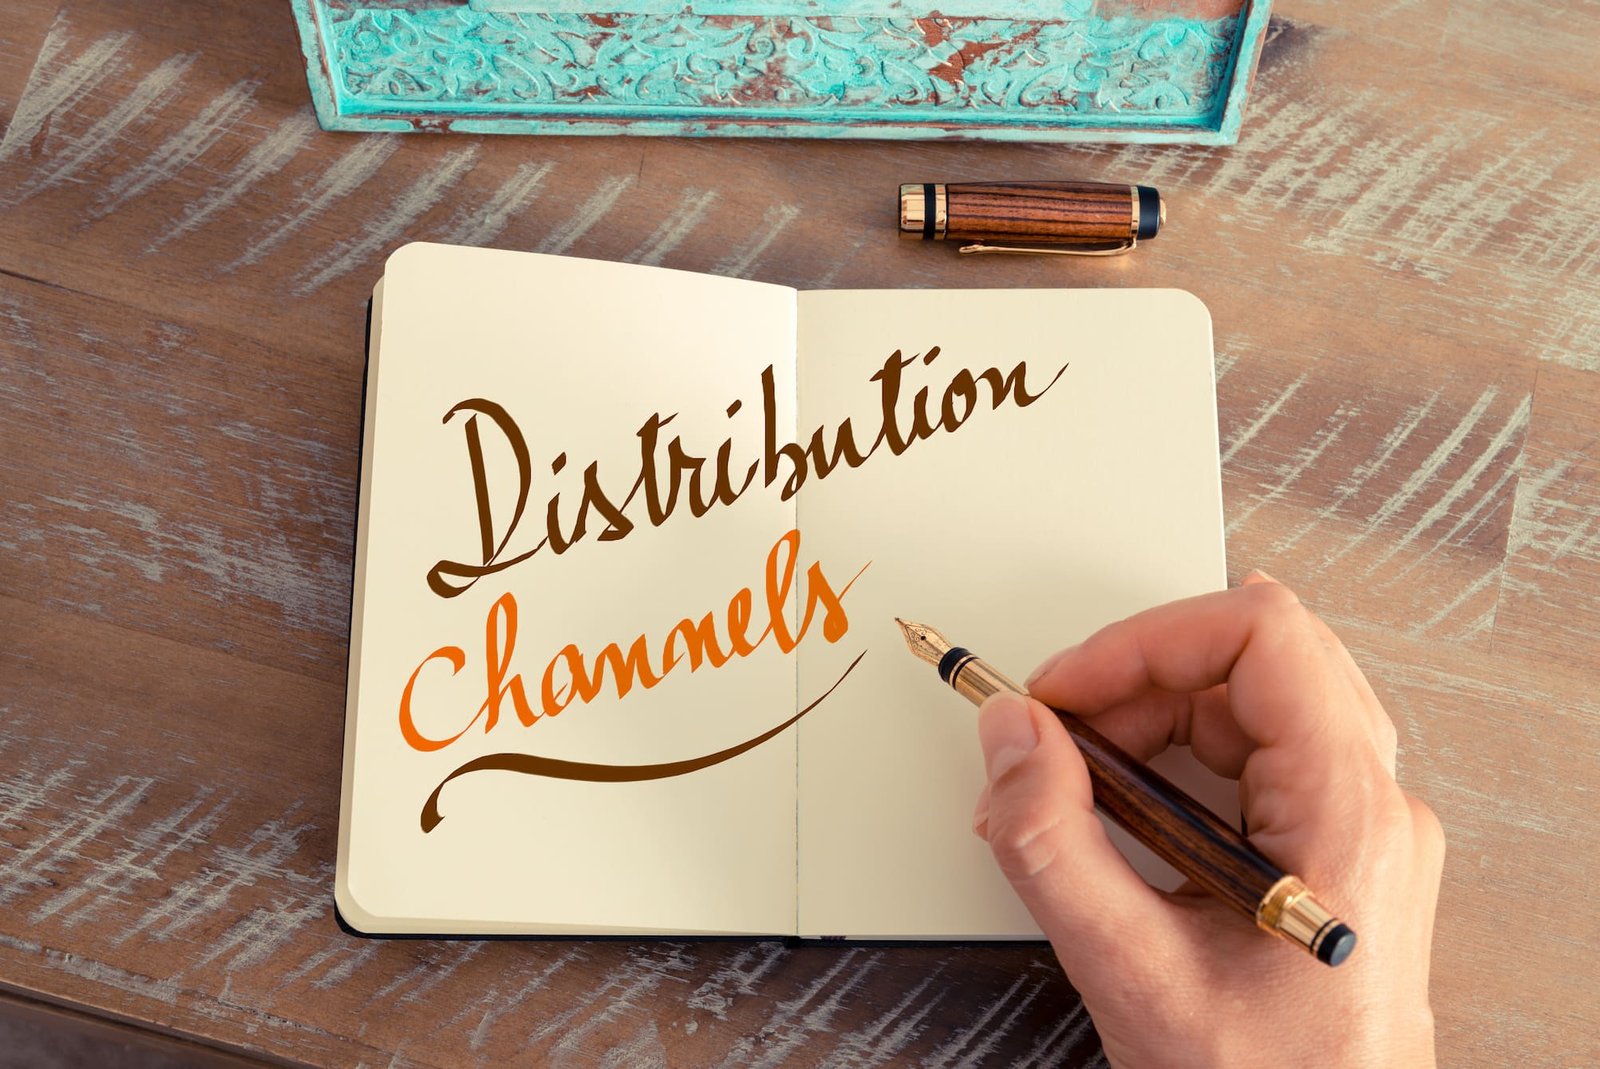 distribution channels in marketing